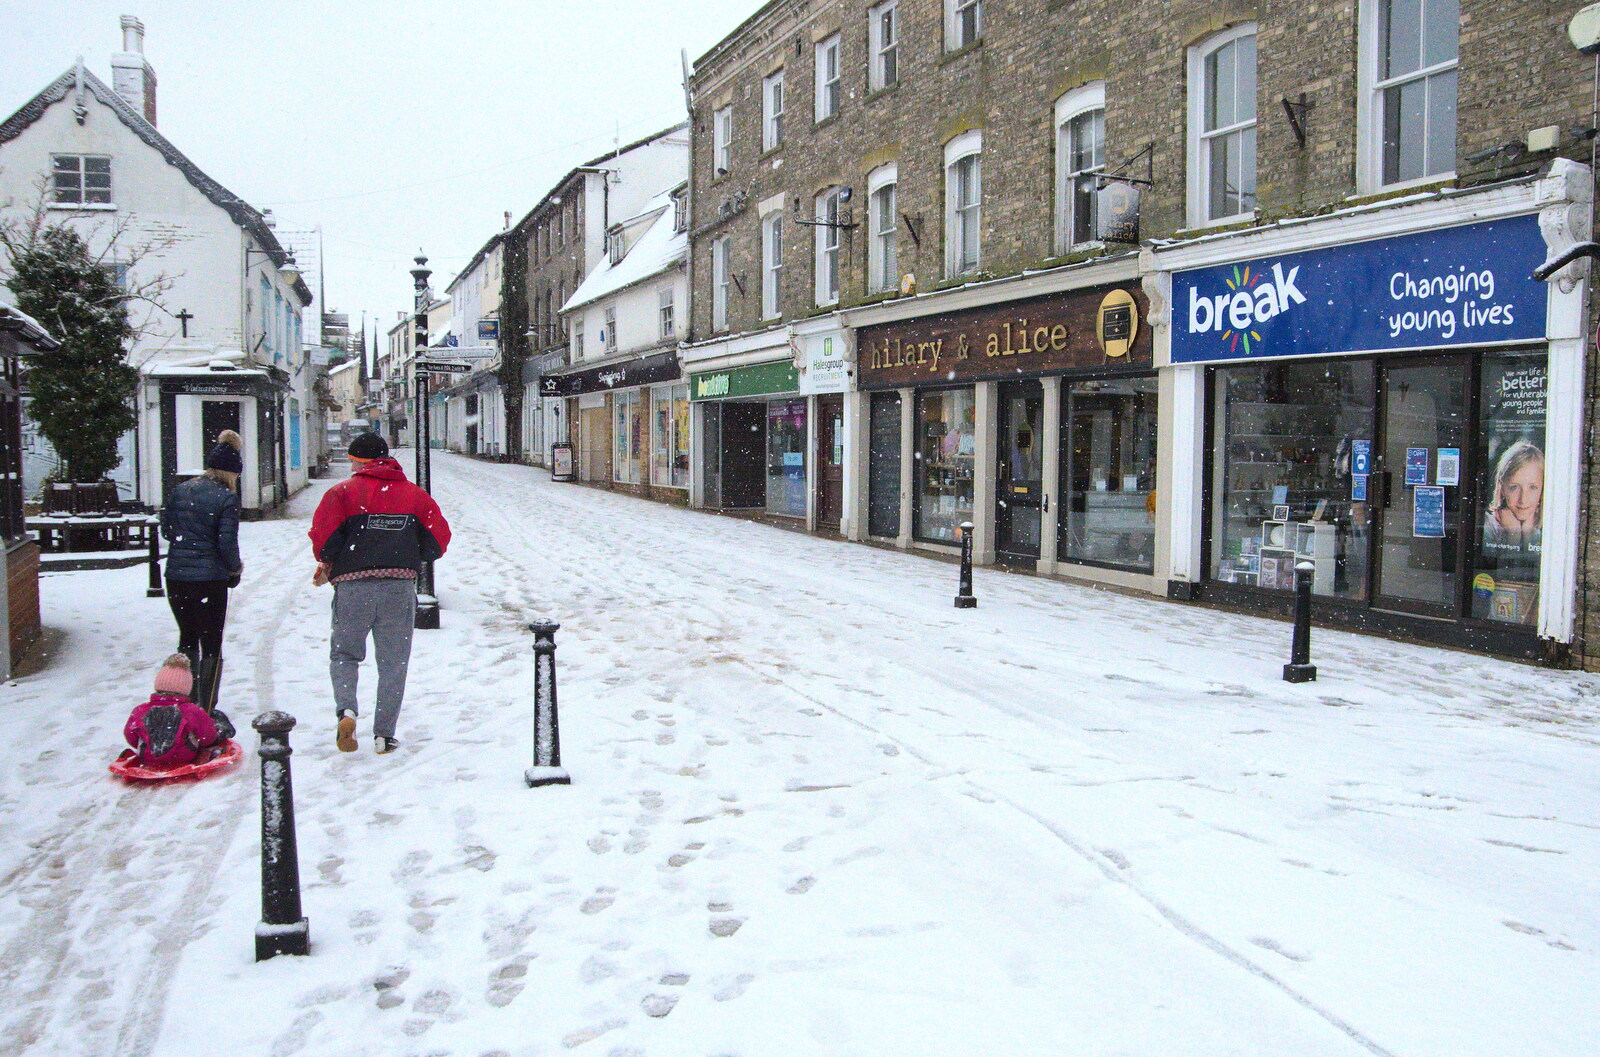 A child gets hauled up Mere Street on a sledge from A Snowy Morning, Diss, Norfolk - 16th January 2021